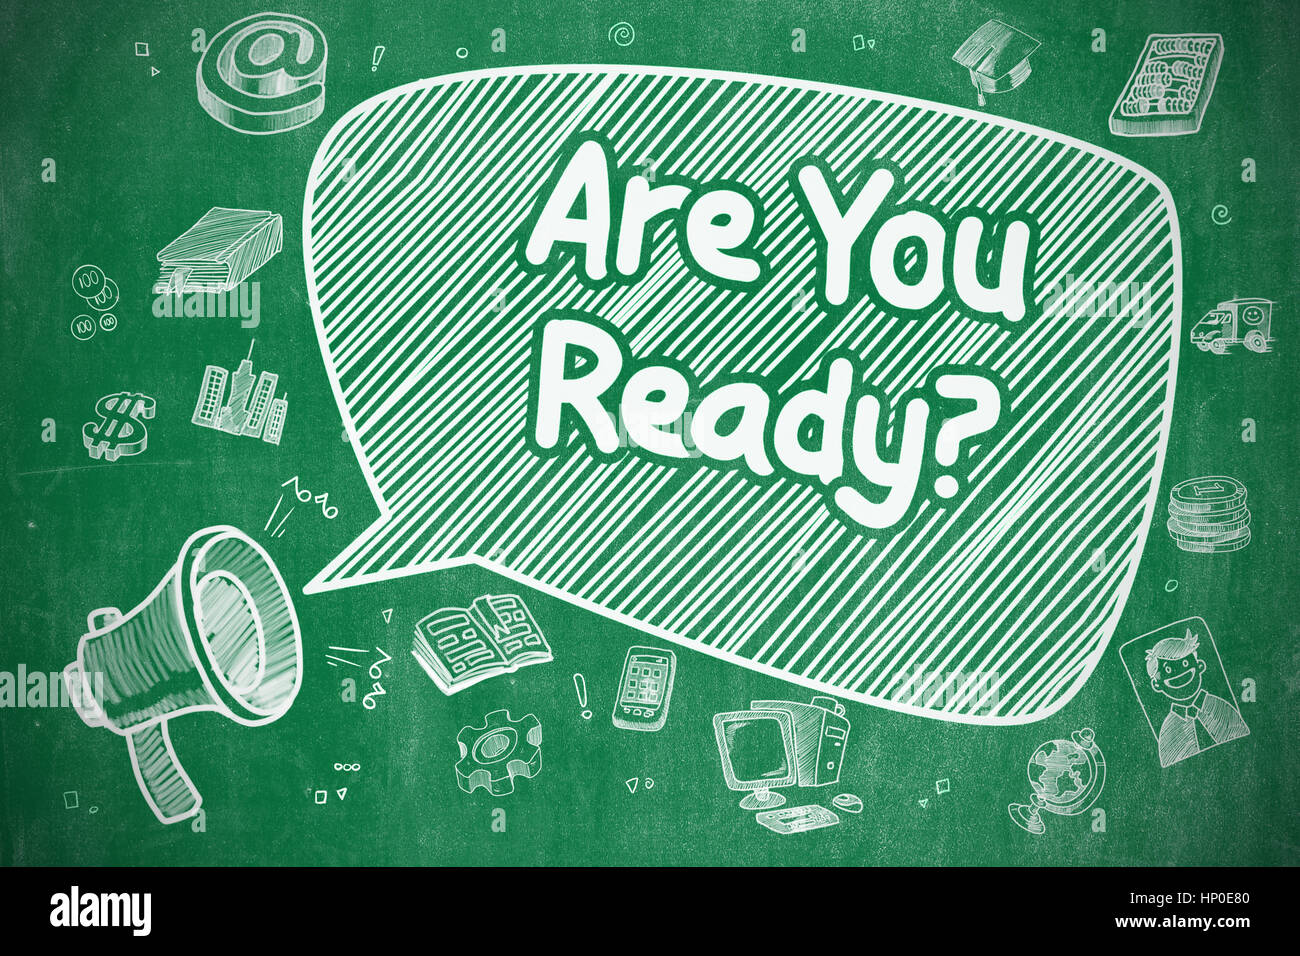 Are You Ready - Hand Drawn Illustration on Green Chalkboard. Stock Photo